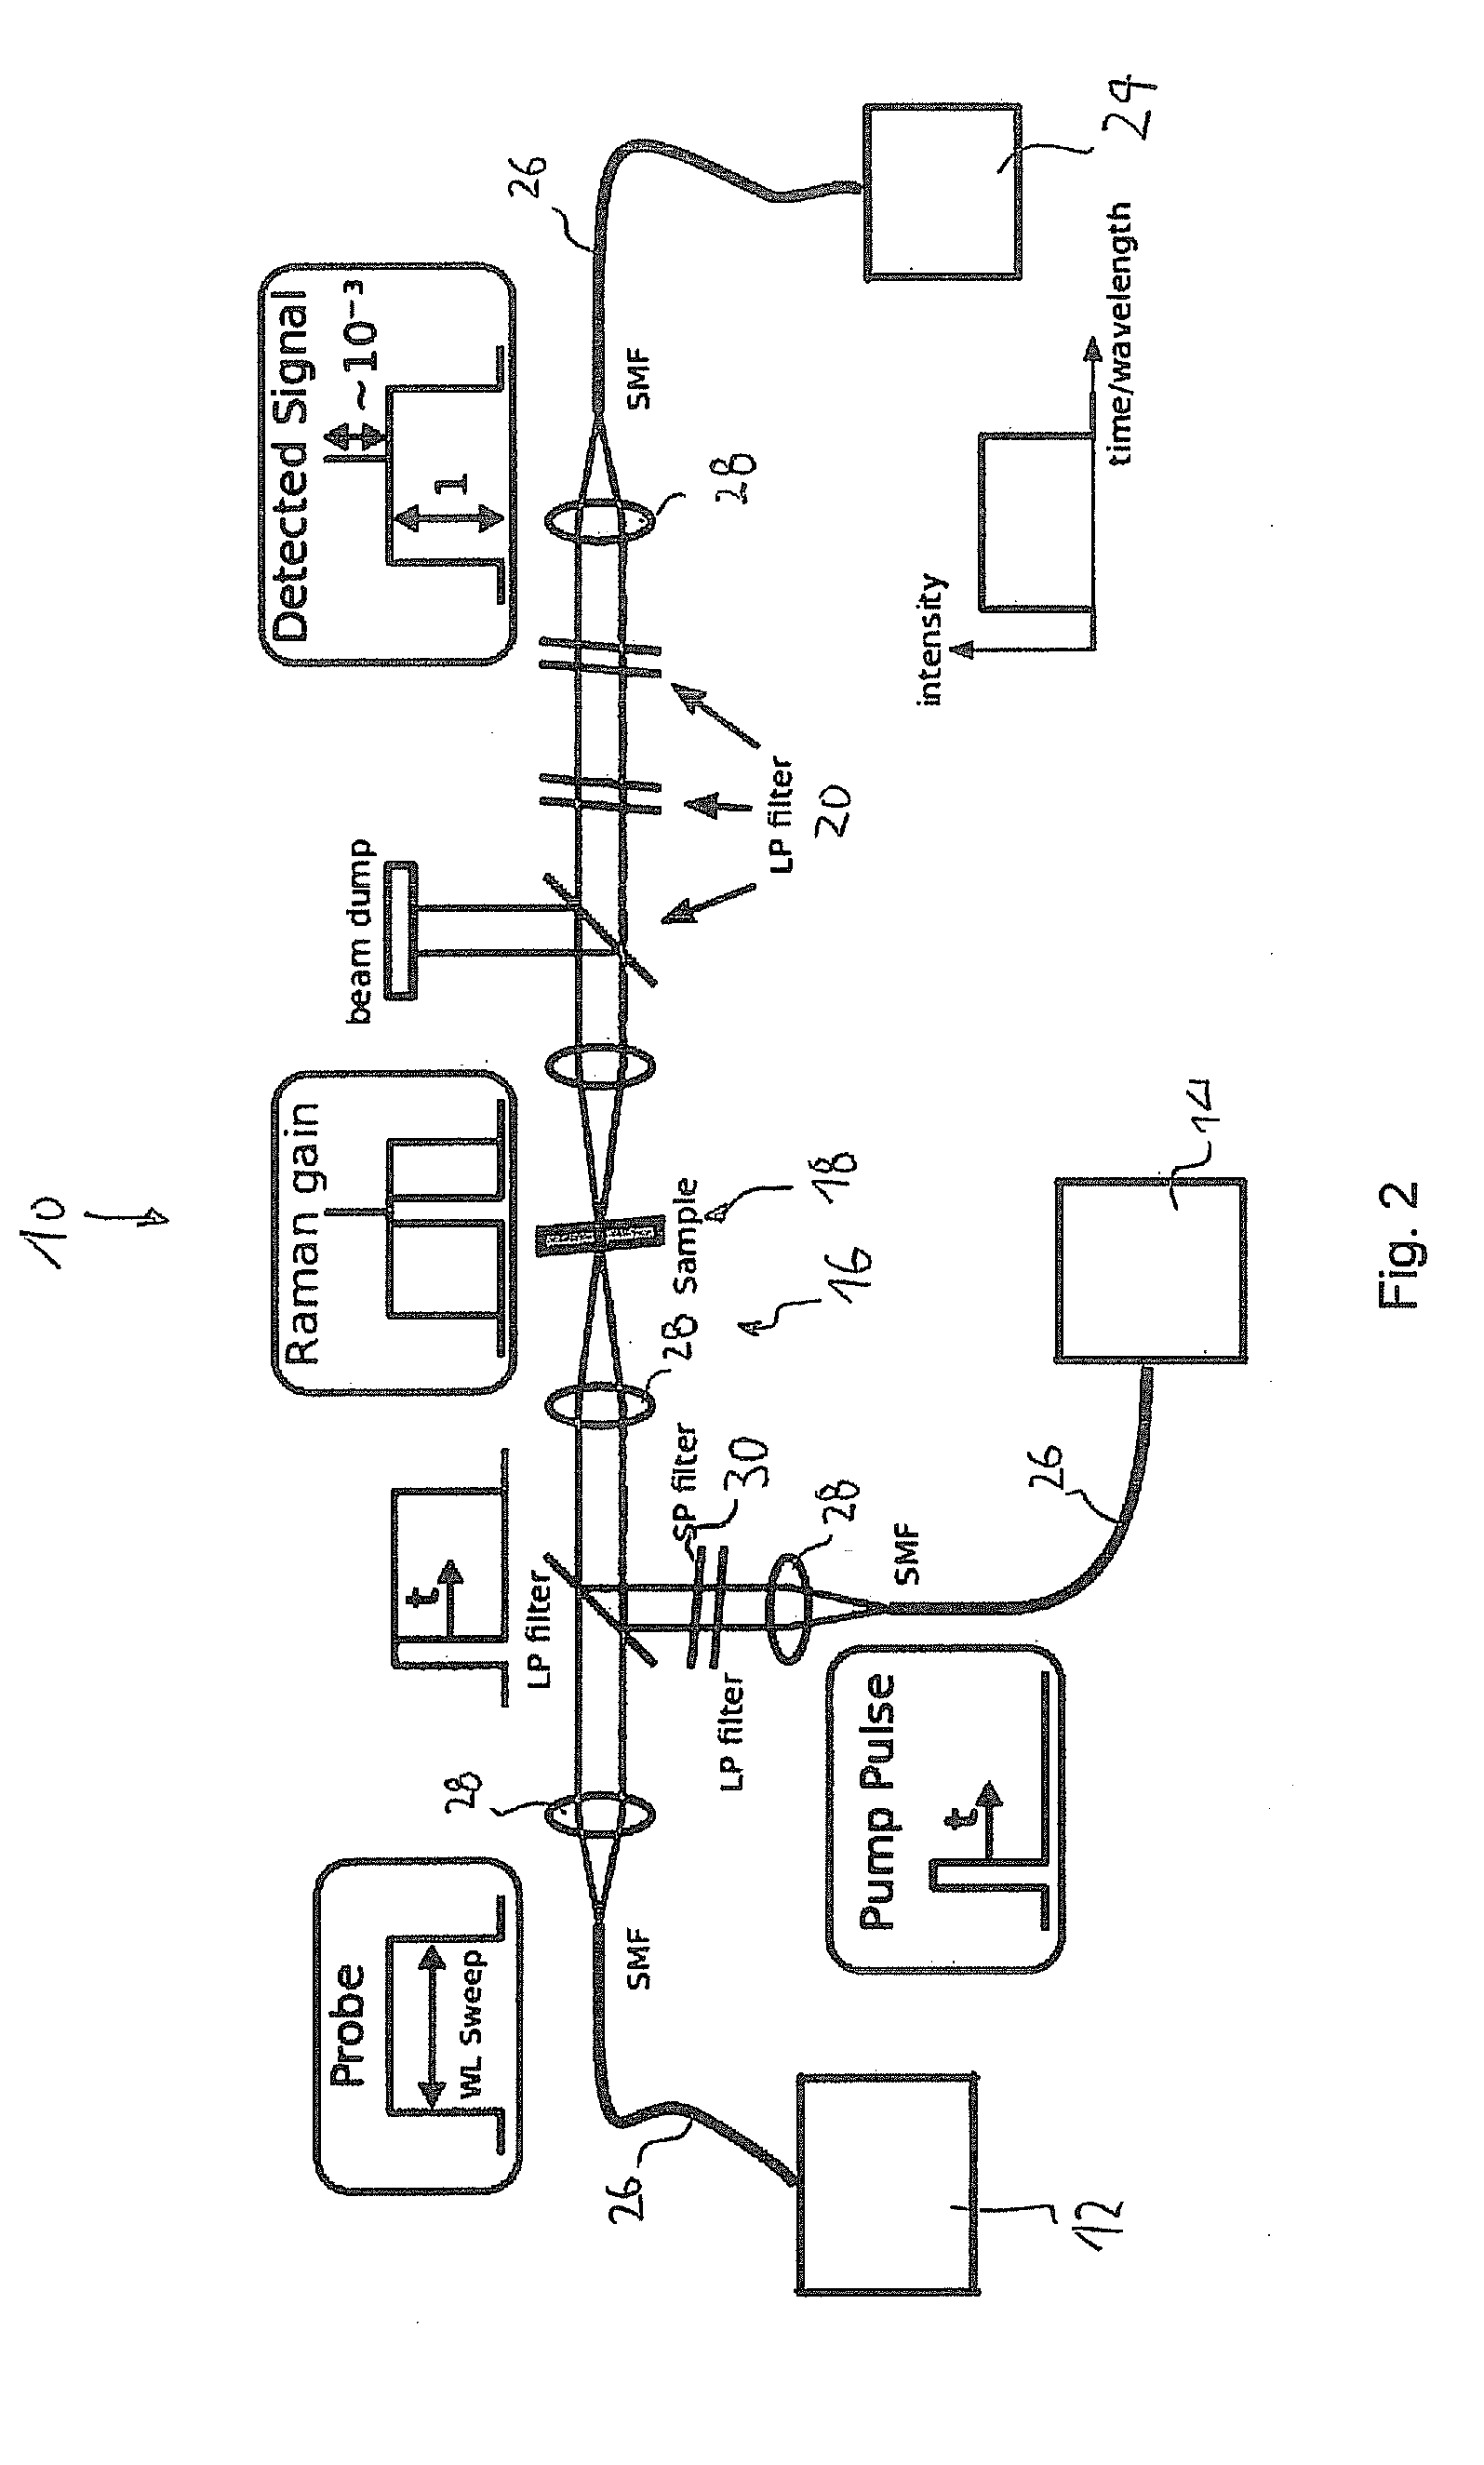 System and Method for Stimulated Raman Spectroscopy